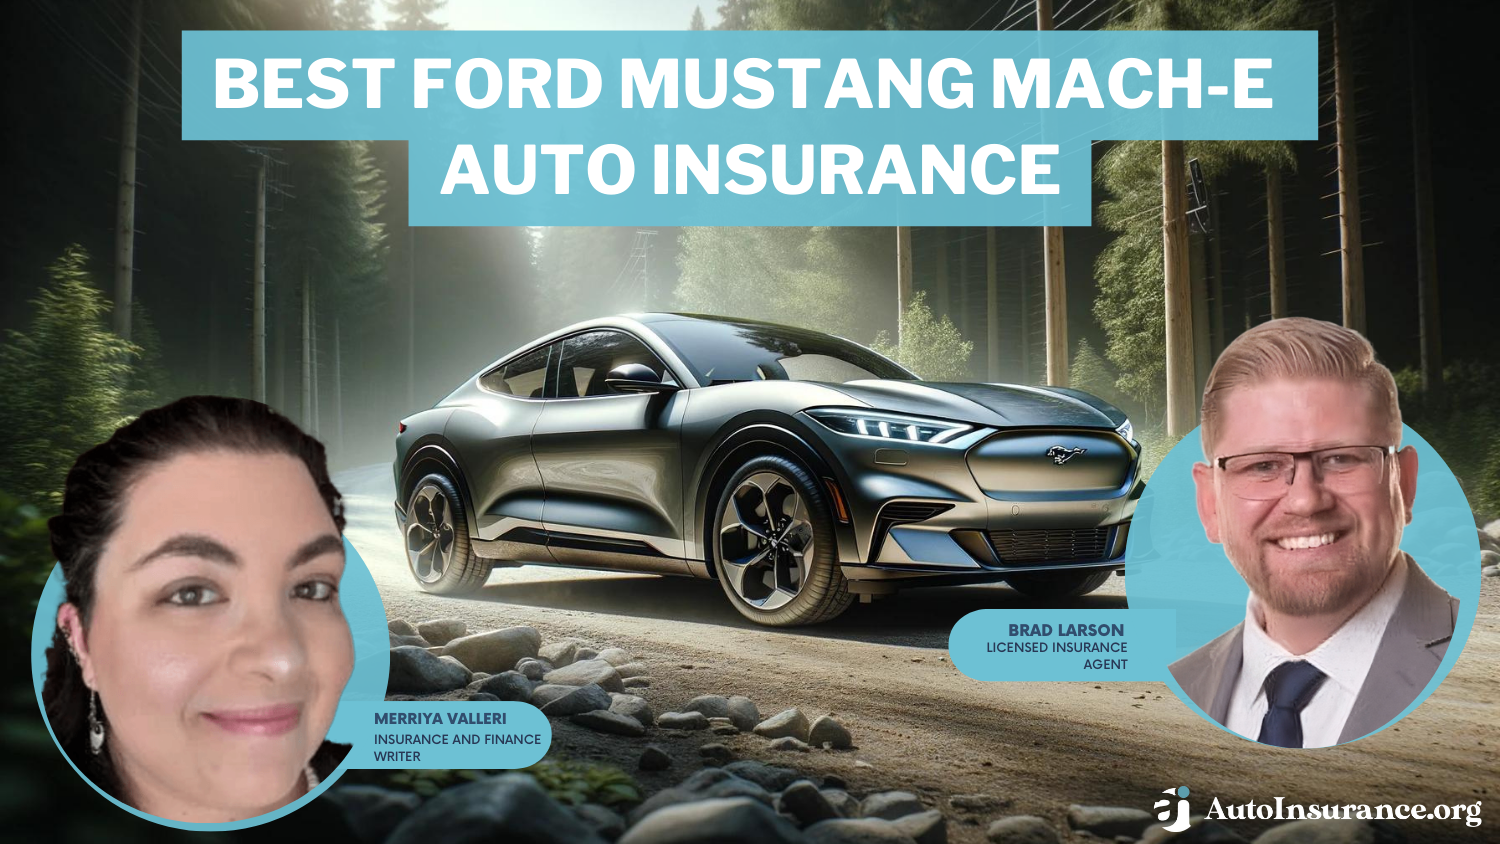 Best Ford Mustang Mach-E Auto Insurance: State Farm, USAA, and Progressive